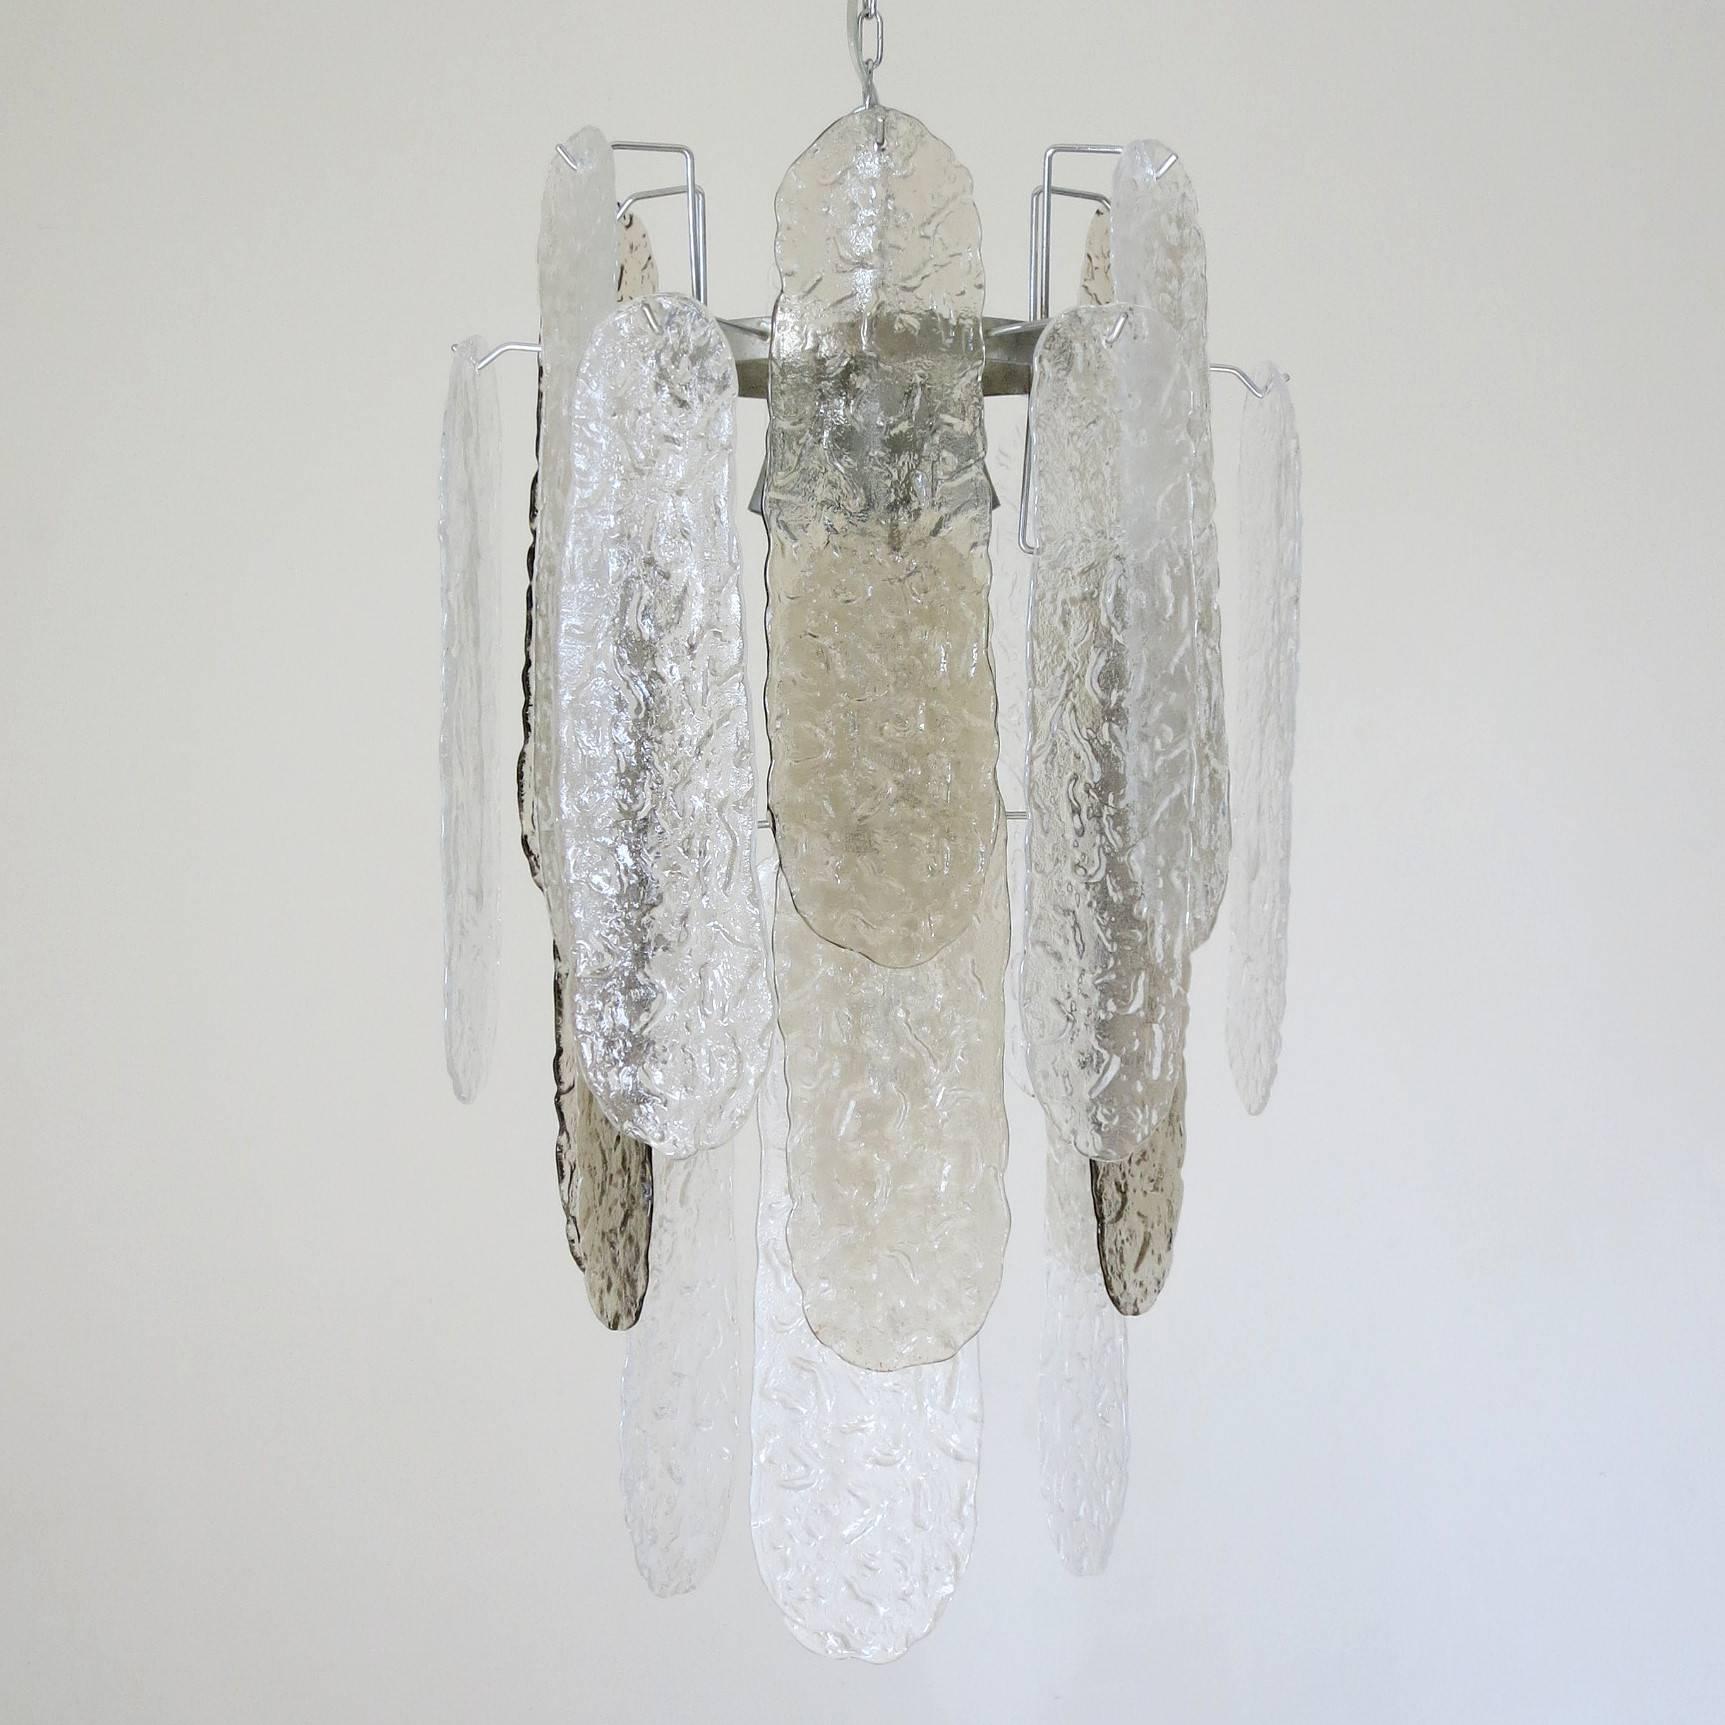 Italian vintage chandelier with clear and smoky Murano glass planks, mounted on nickel frame / Designed by Mazzega circa 1960s / Made in Italy
Diameter: 18 inches / Height: 32 inches plus chain and canopy
4 lights / E12 or E14 type / max 40W each
1